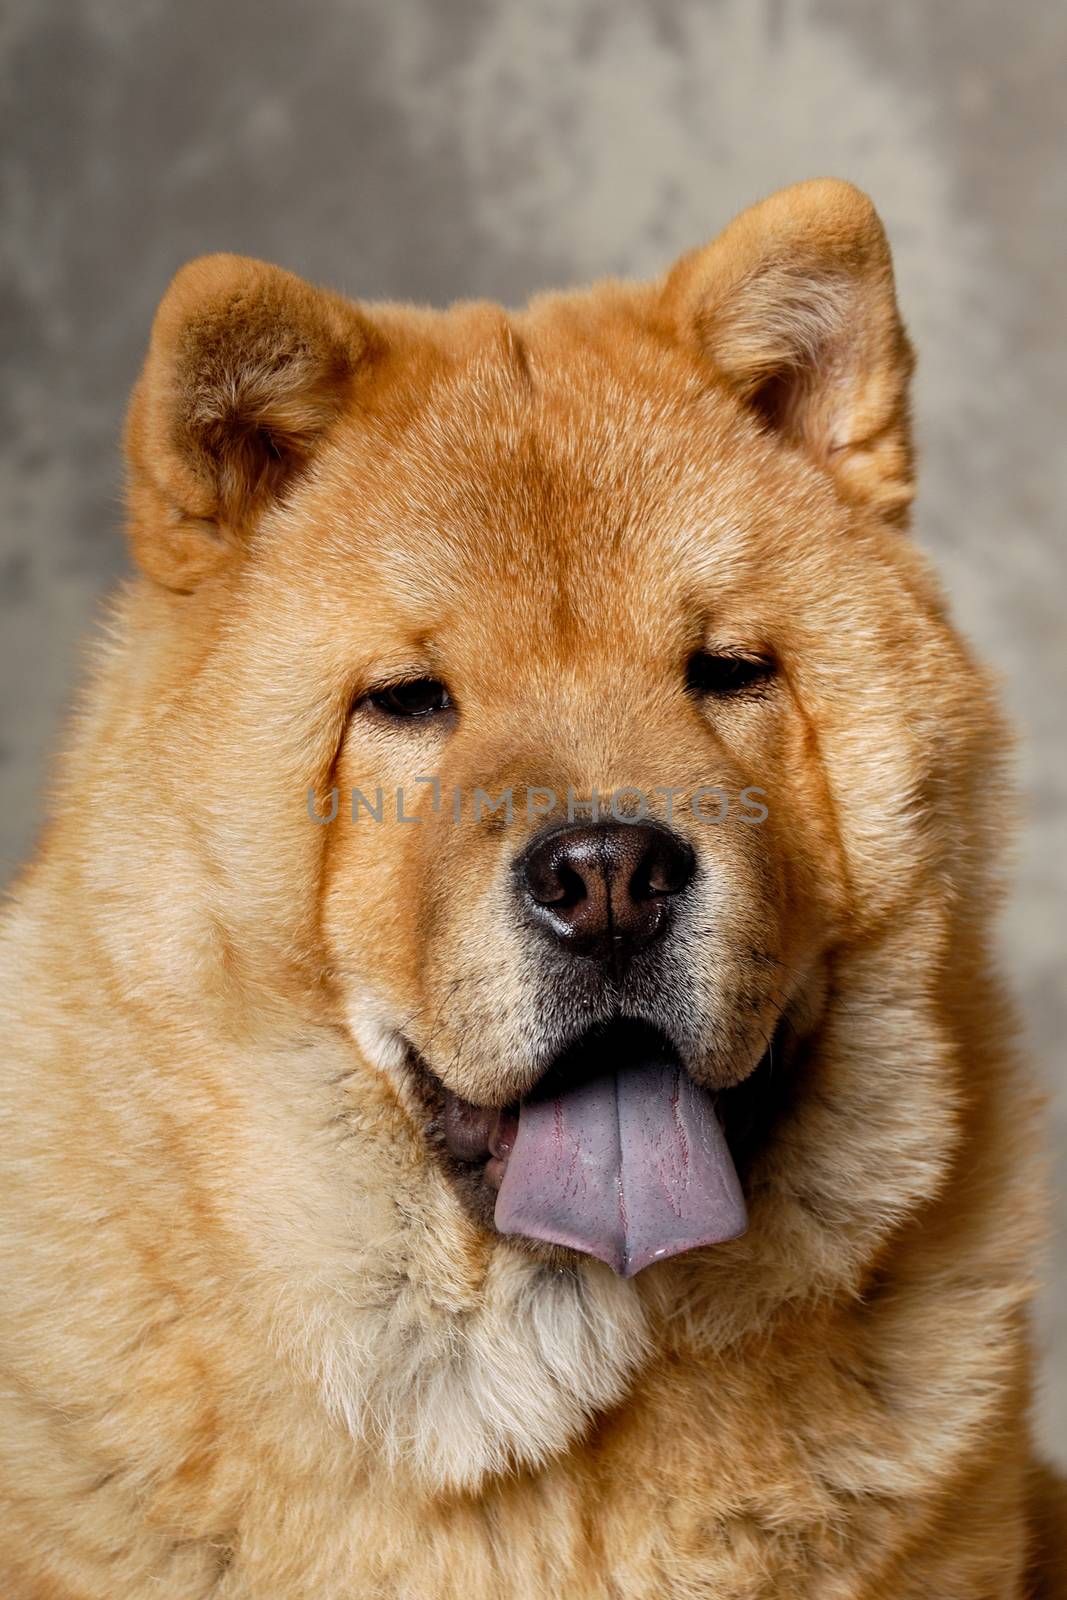 A face of a Chow dog